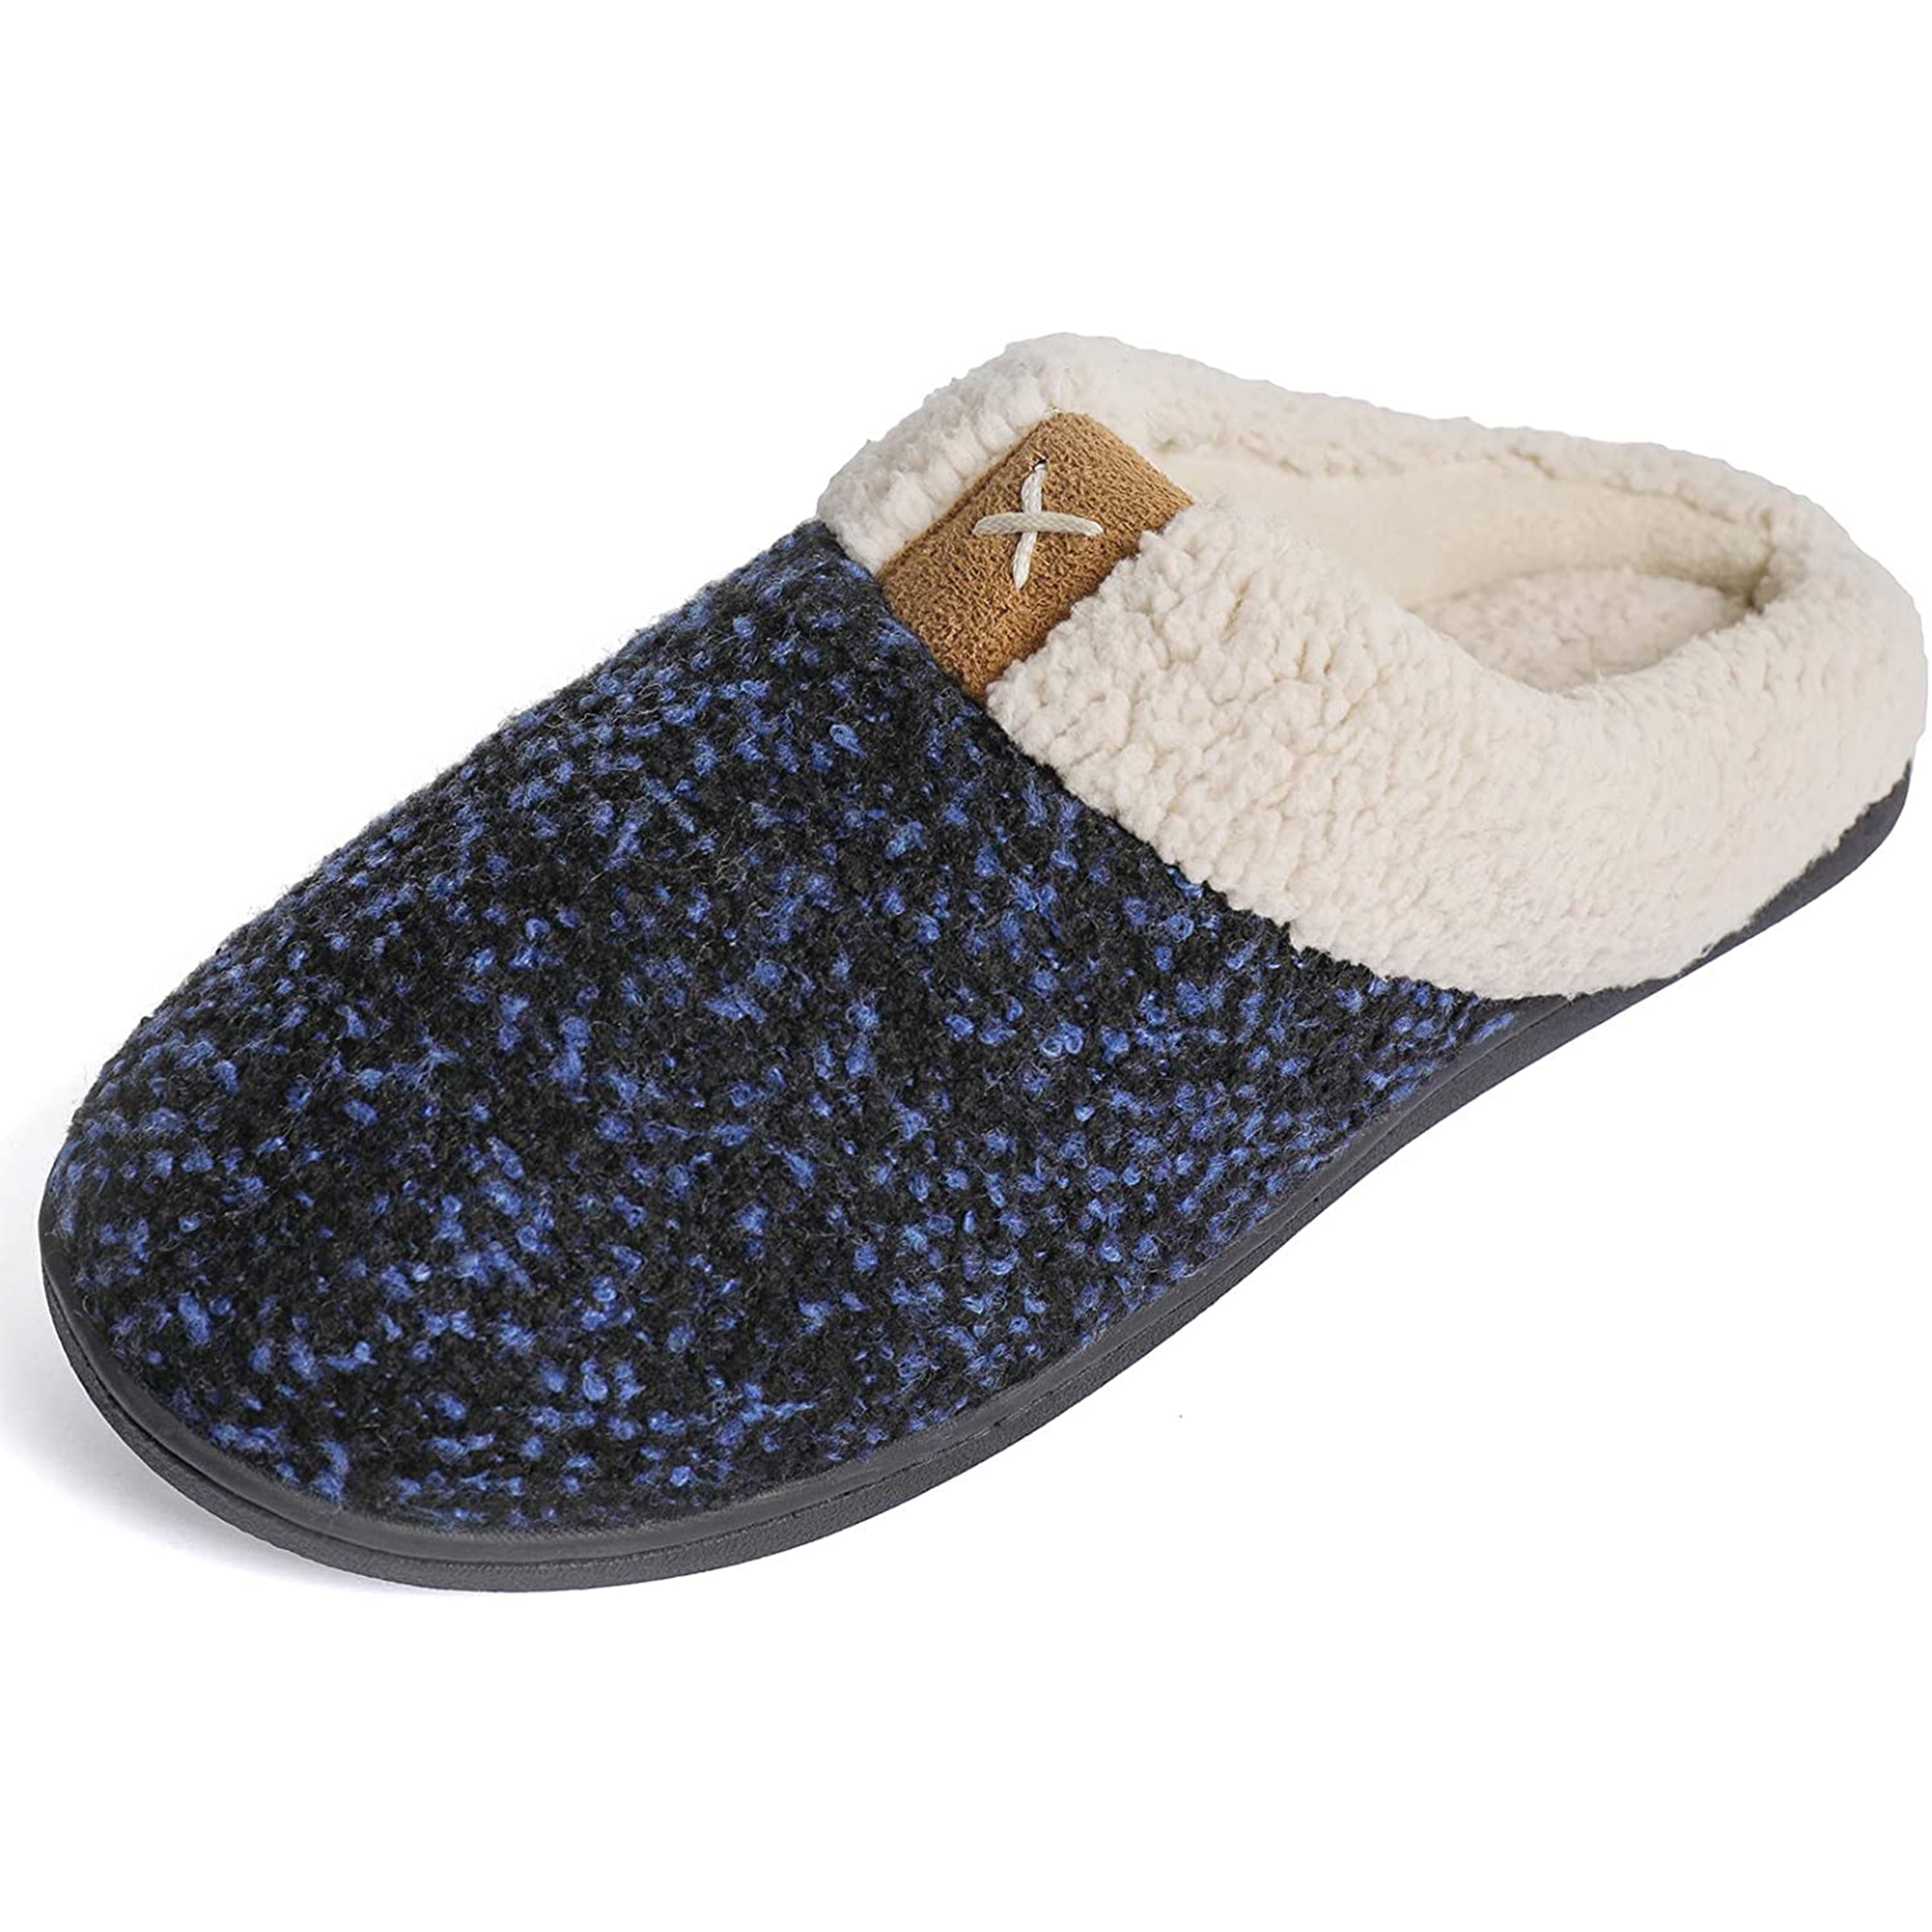 Knit Slippers for Men with Plush Lining,Anti-Skid Sole Slip On House Shoes,Memory Foam Bedroom Slippers